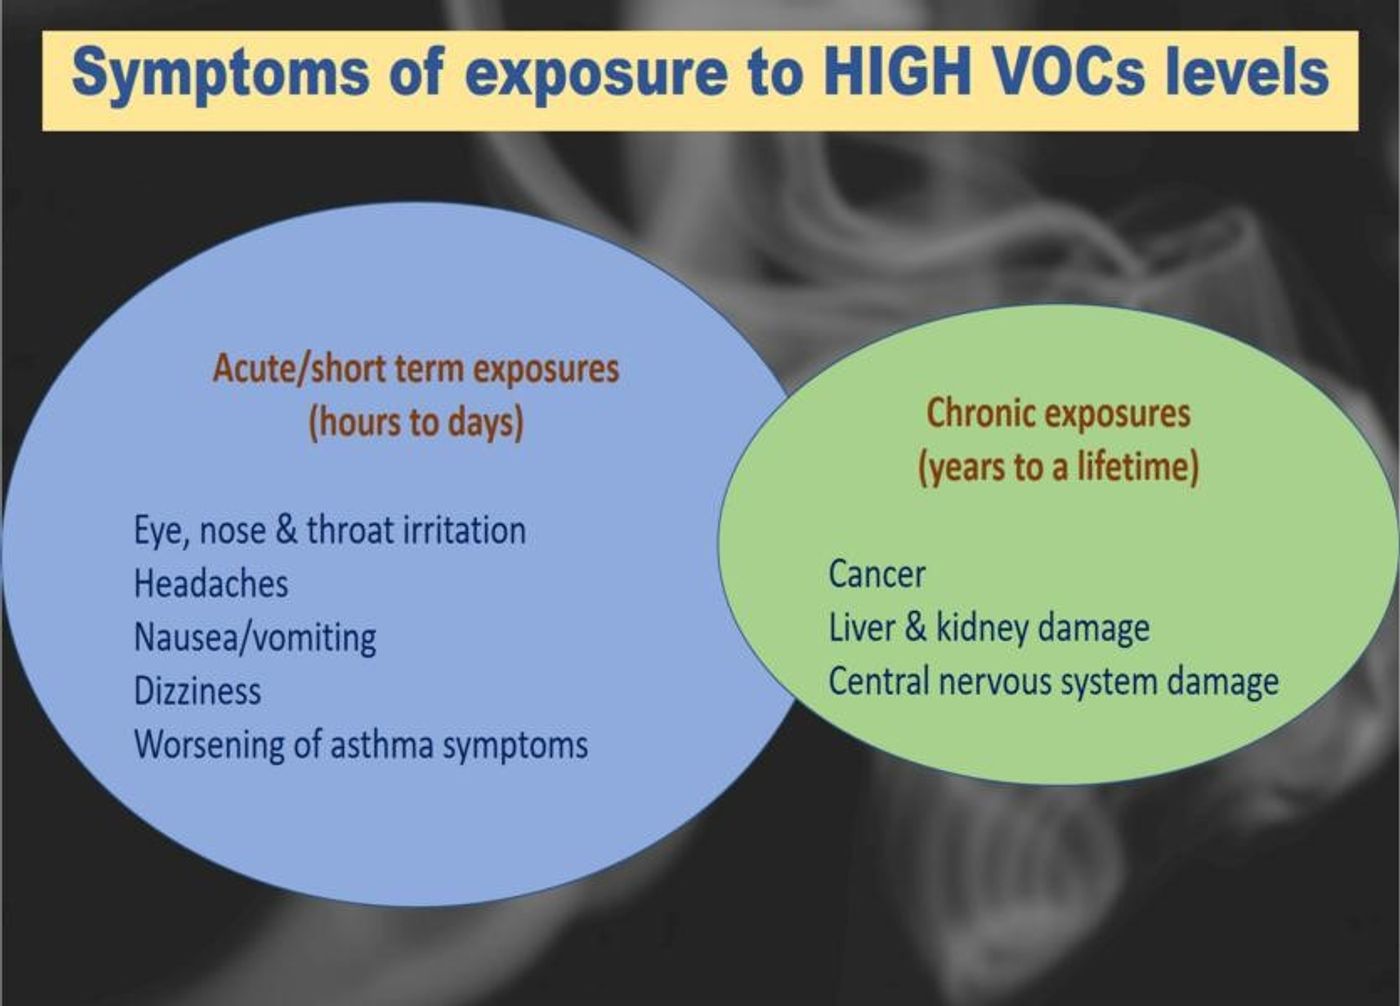 Figure 1: Short- and Long-term adverse health effects indoors when exposed to VOCs. (Minnesota Department of Health)